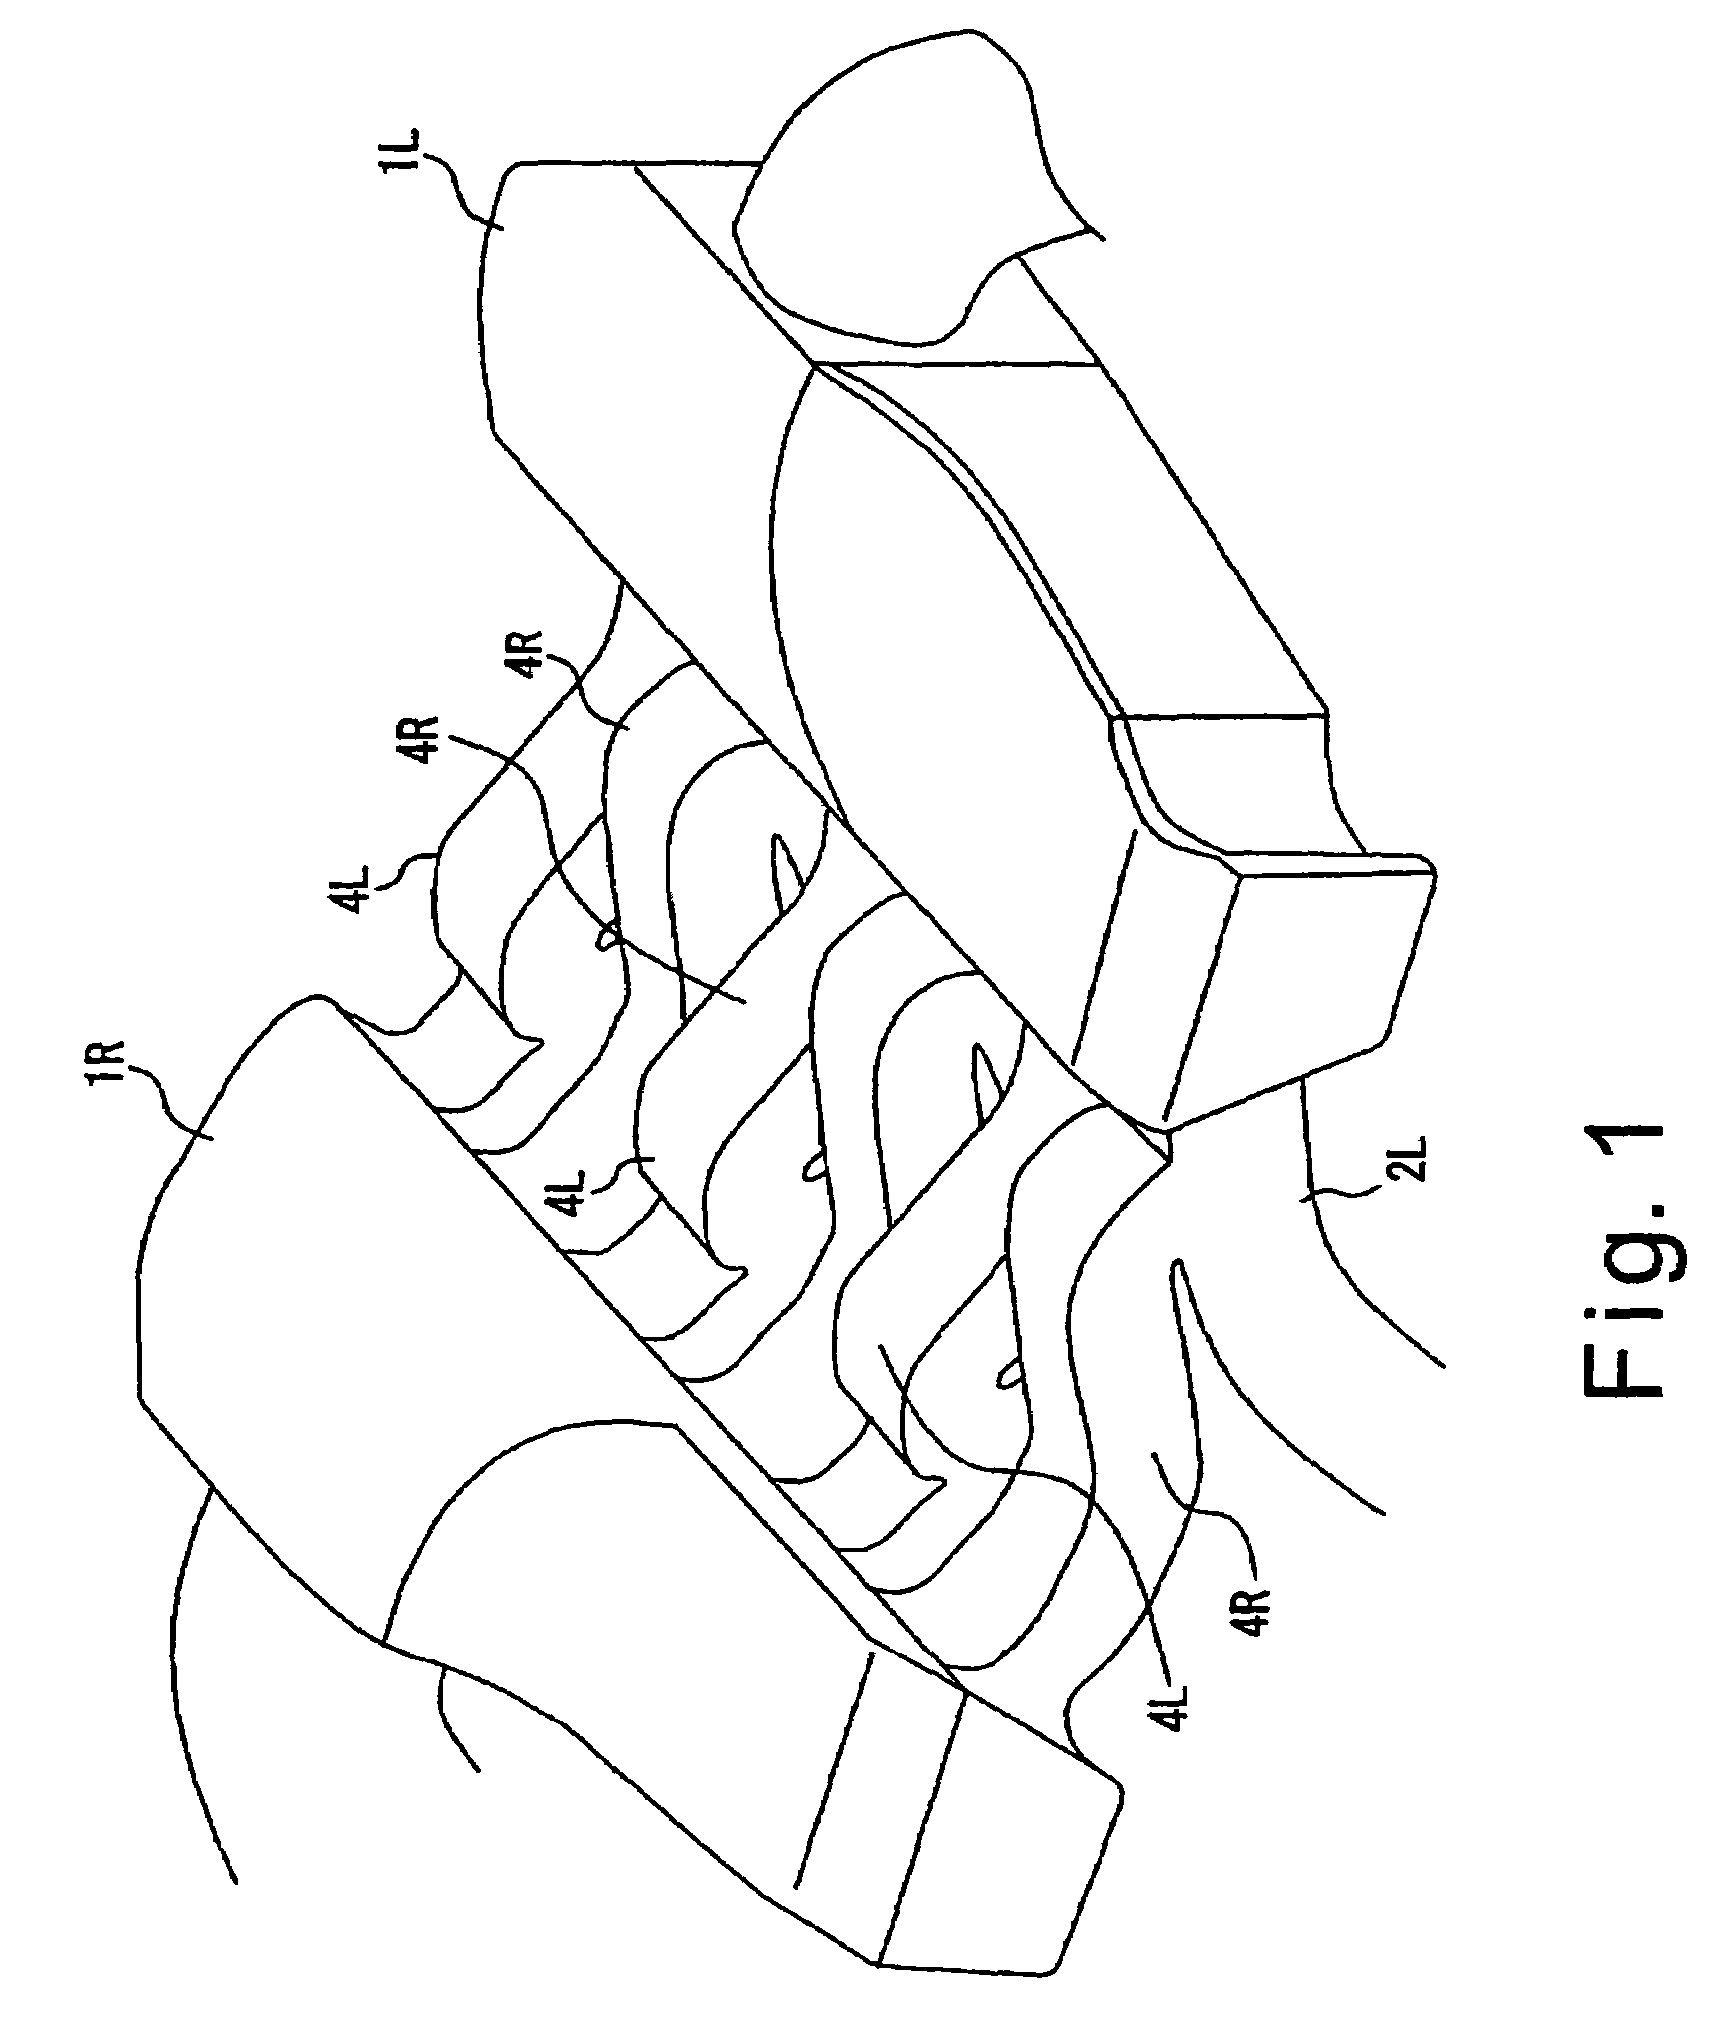 V-type multiple-cylinder air intake device